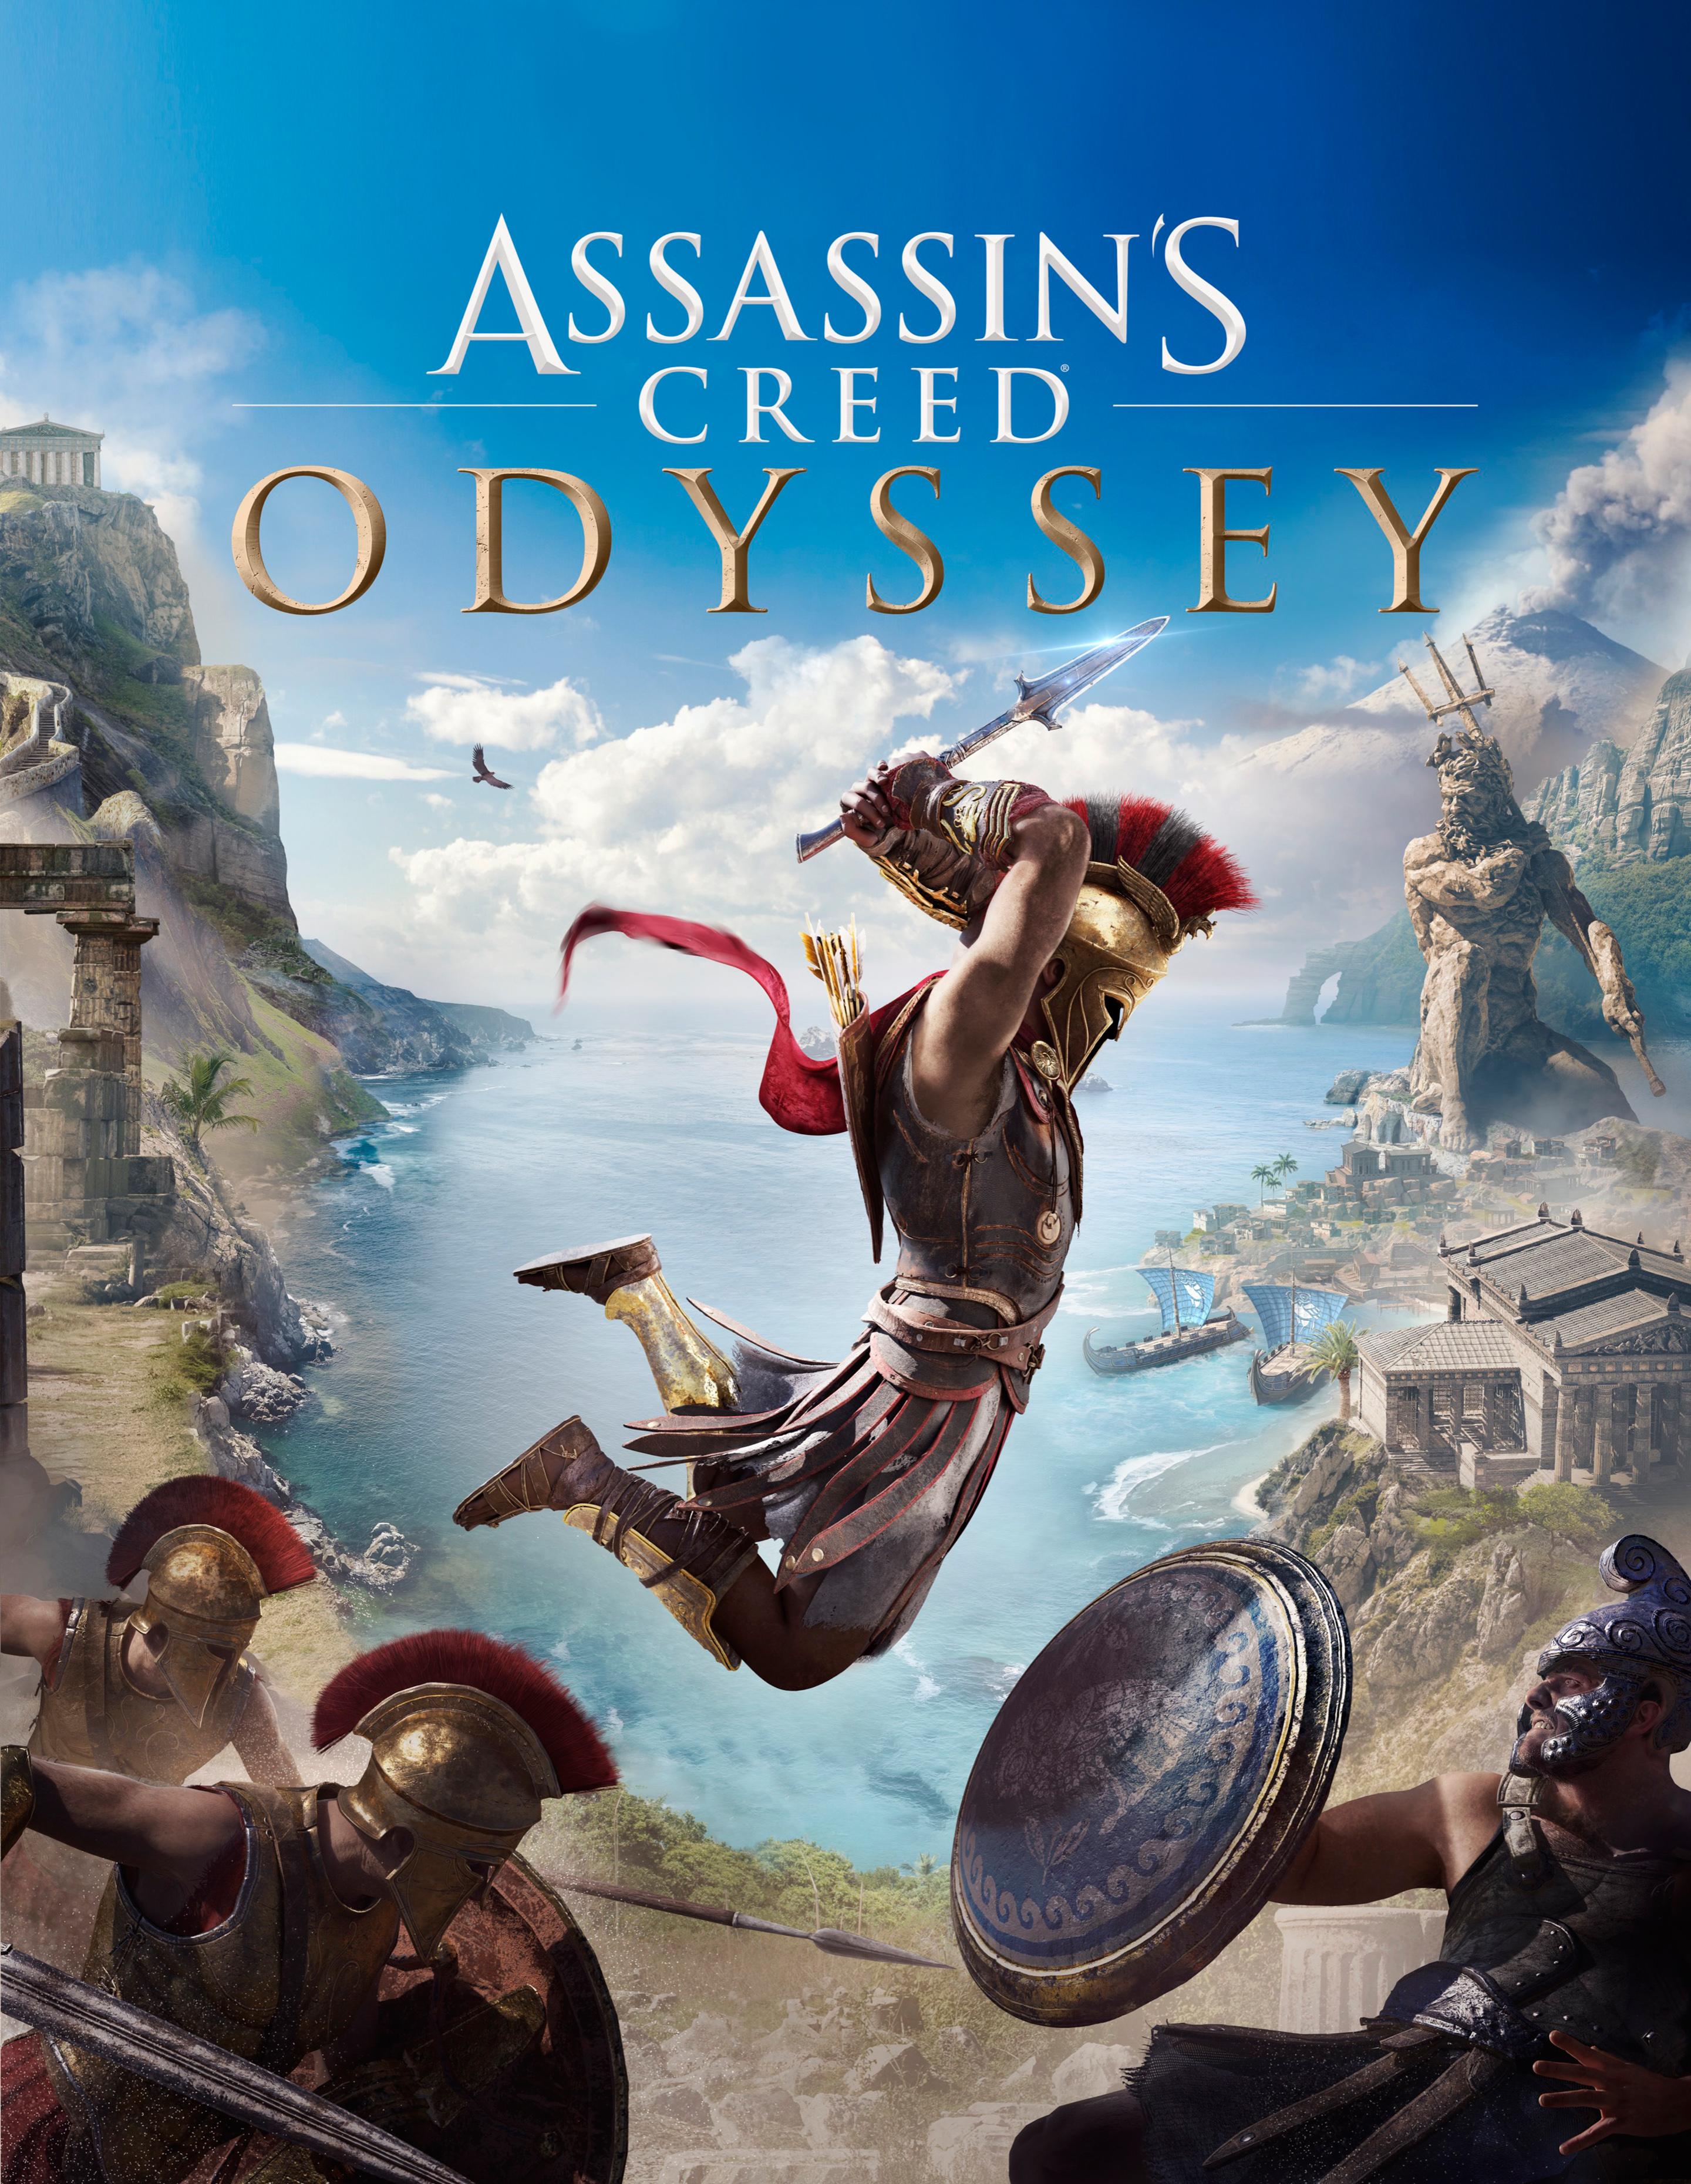 Assassins Creed Odyssey Game Wallpapers Wallpaper Cave 4895